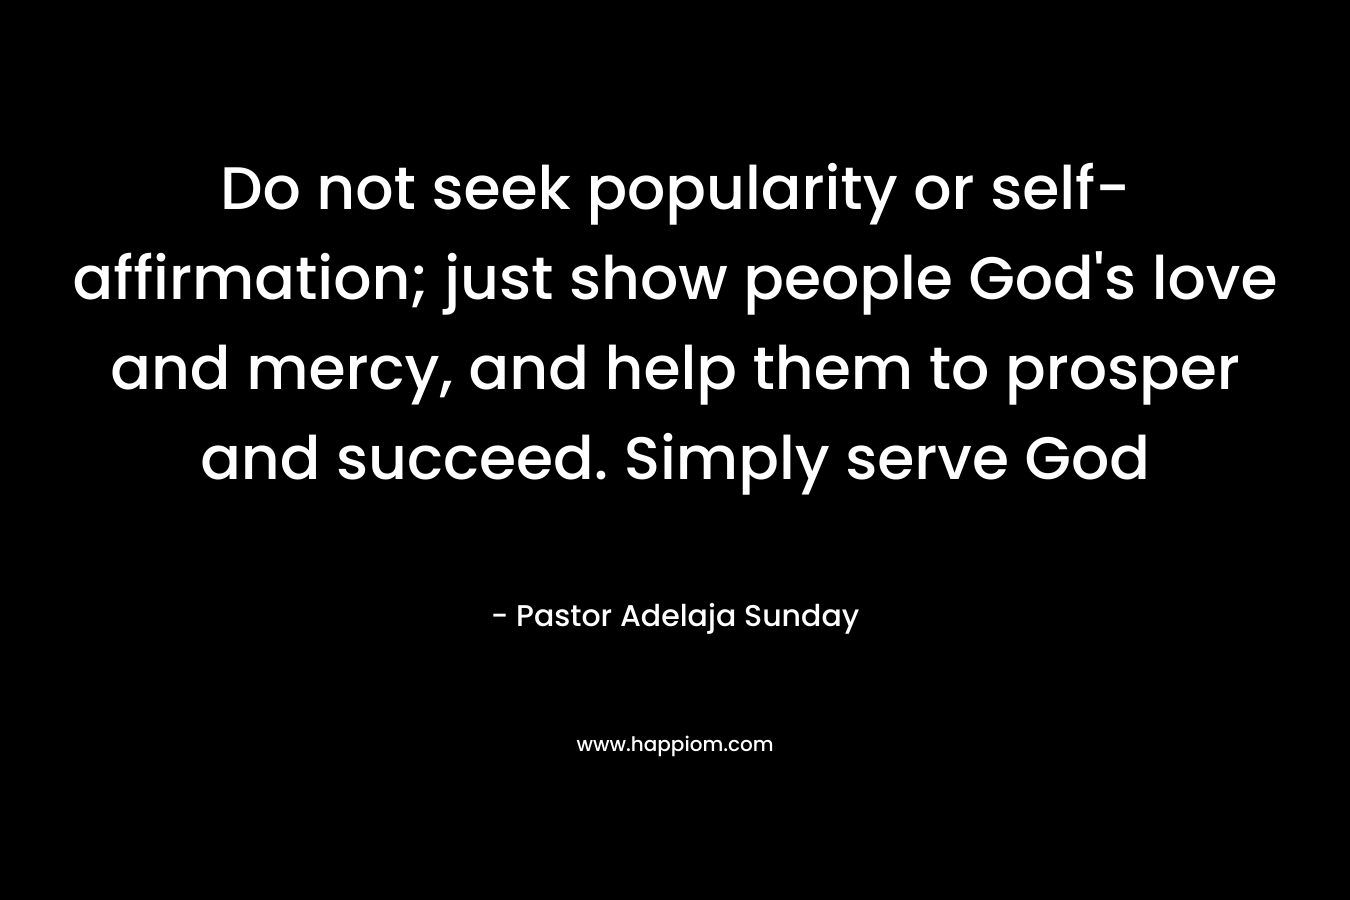 Do not seek popularity or self-affirmation; just show people God's love and mercy, and help them to prosper and succeed. Simply serve God